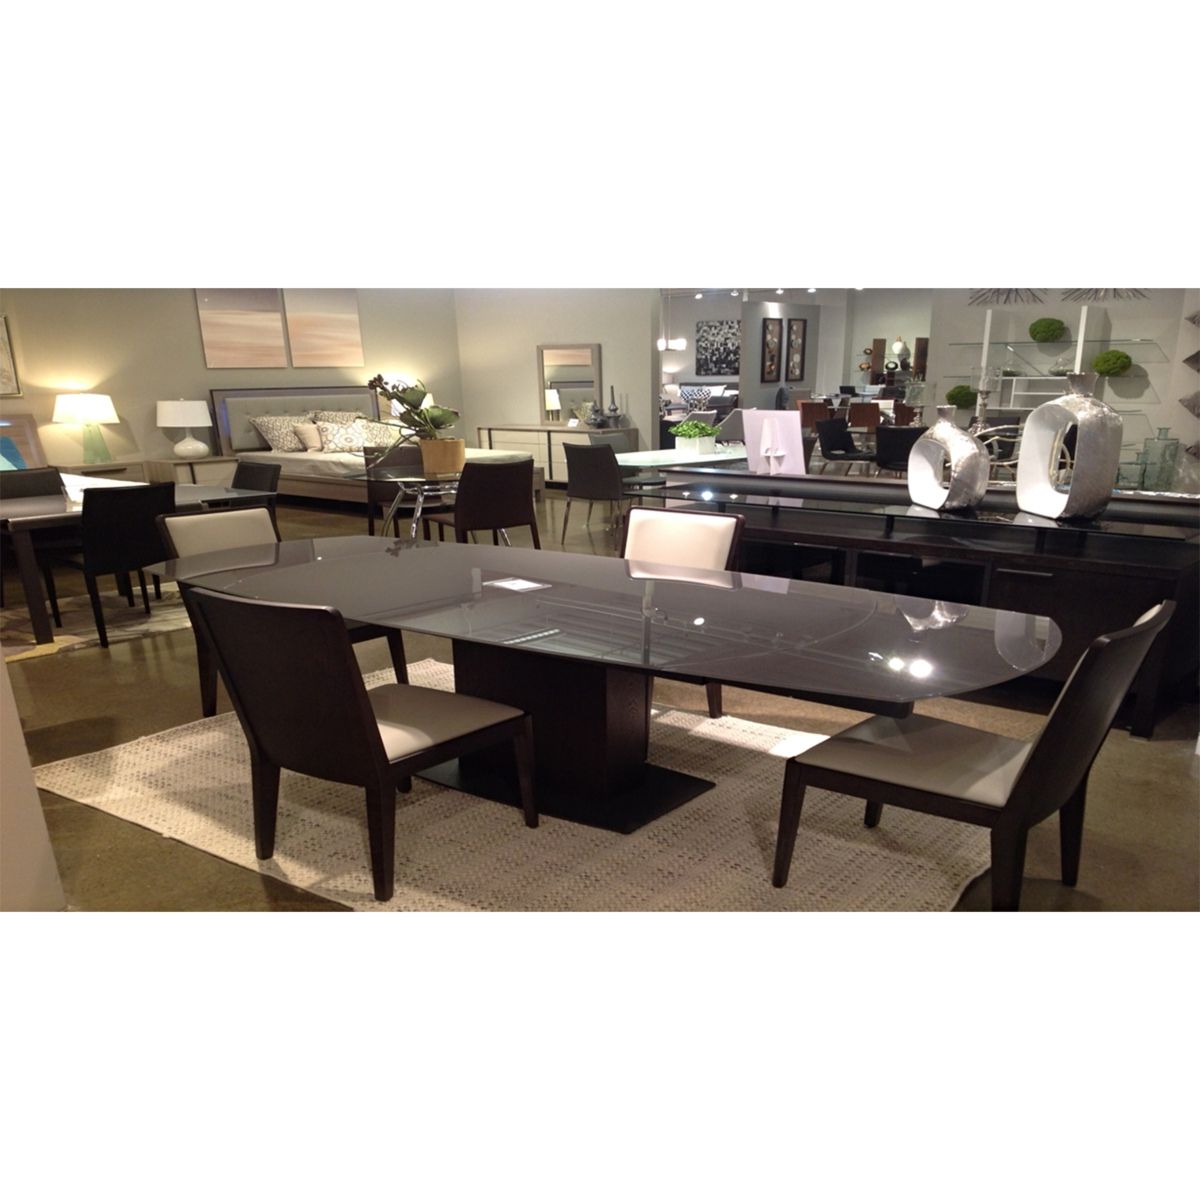 Modena Extendable Dining Table Regarding Preferred Mateo Extending Dining Tables (View 8 of 25)